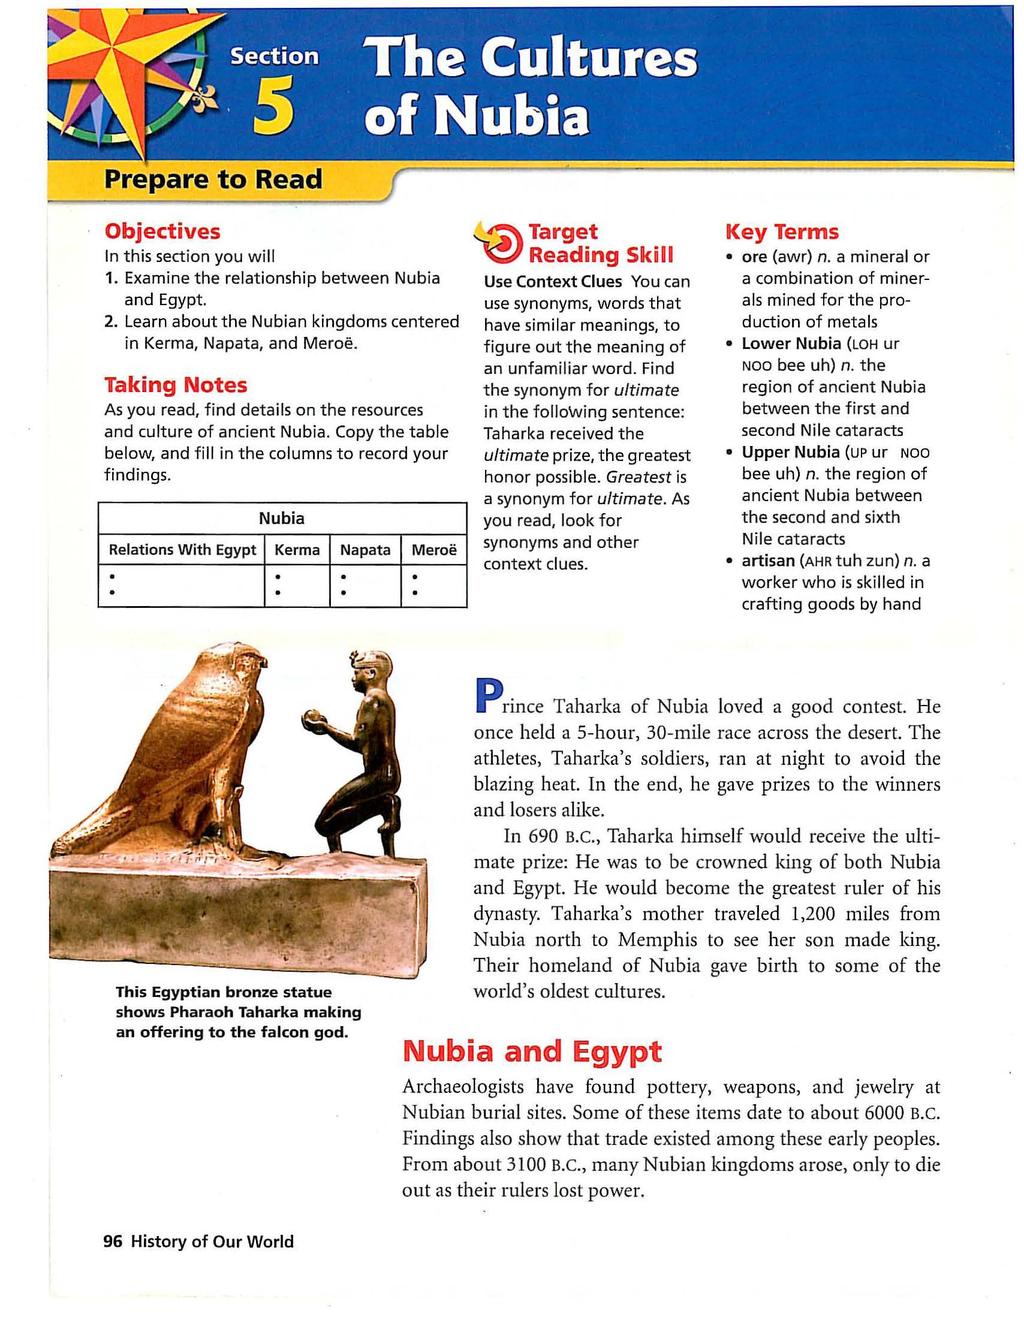 Prepare to Read Objectives In this section you will 1. Examine the relationship between Nubia and Egypt. 2. Learn about the Nubian kingdoms centered in Kerma, Napata, and Meroe.